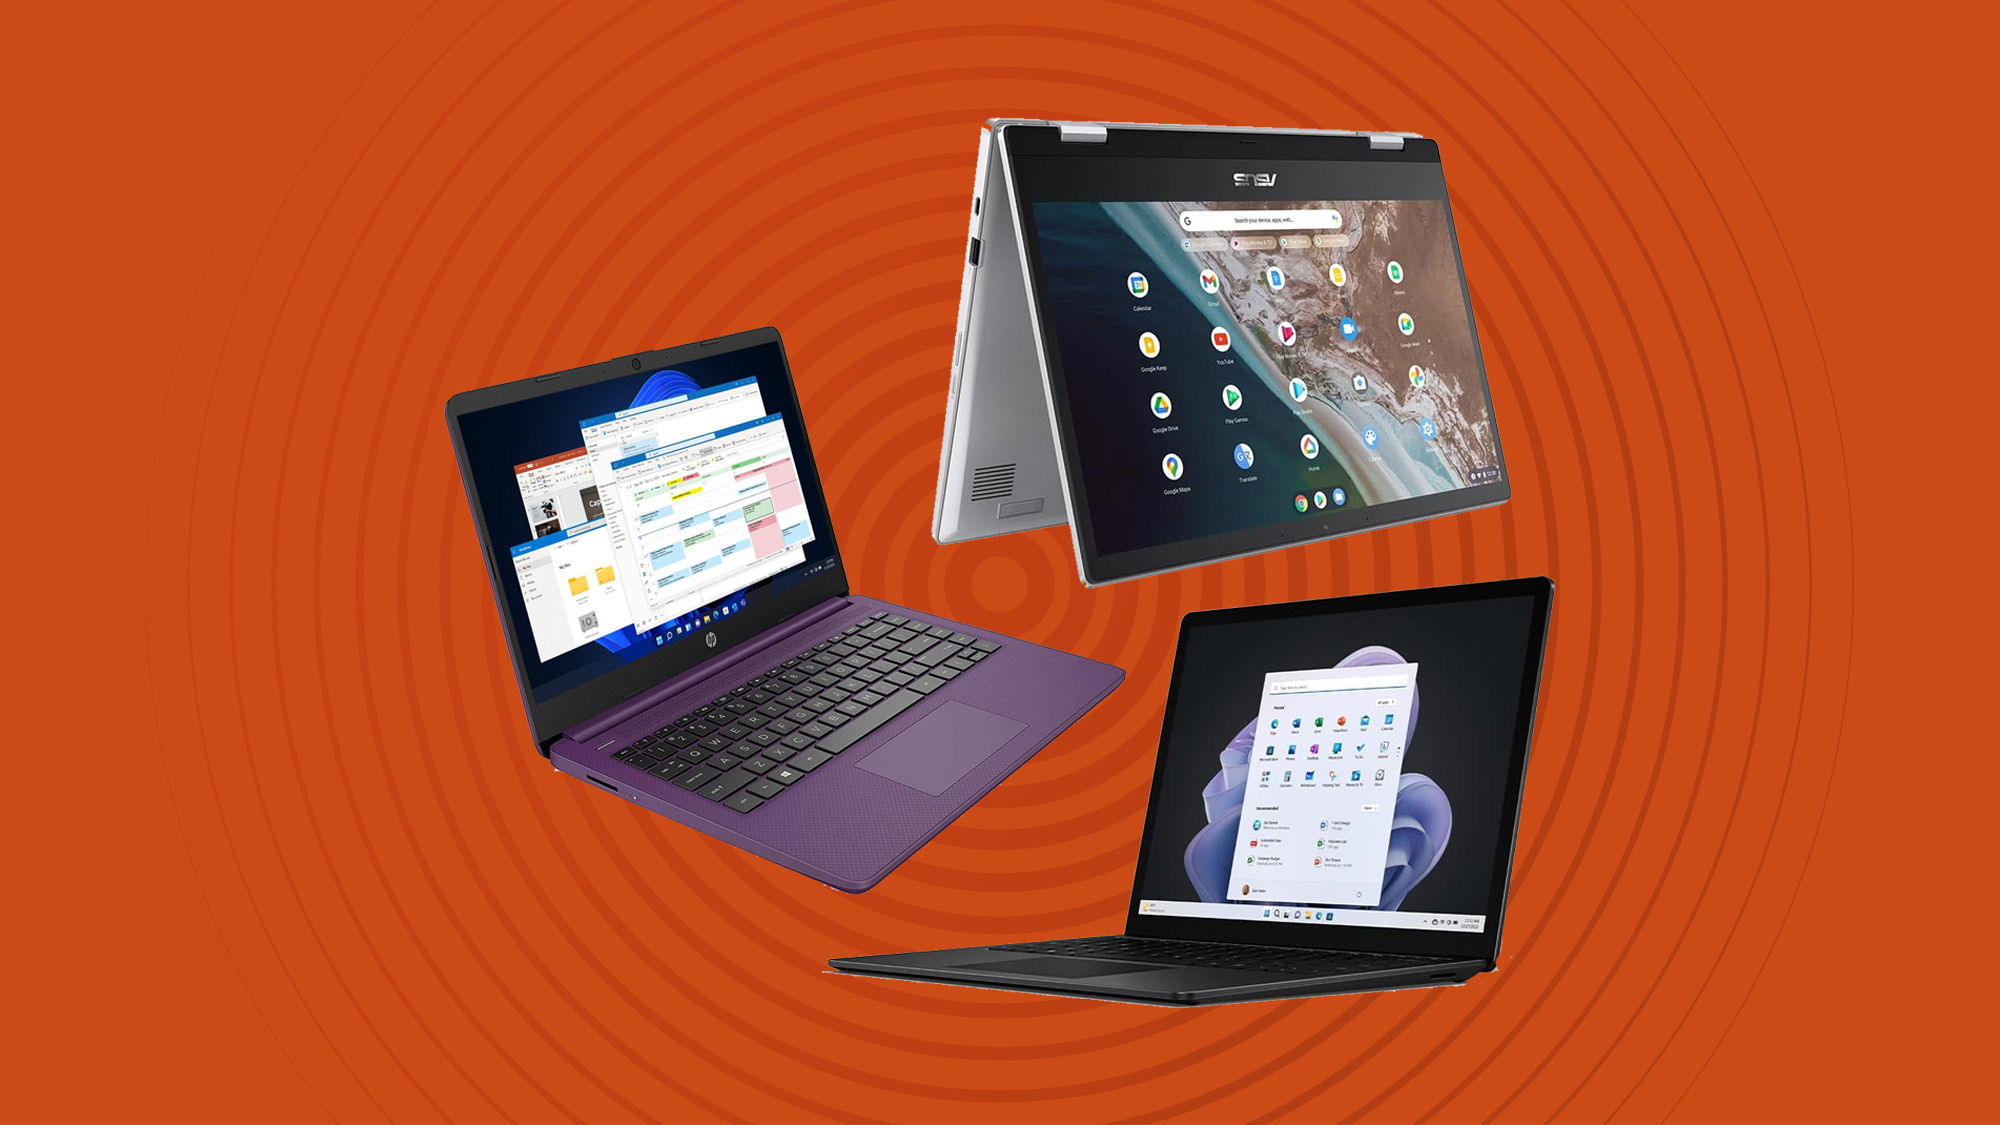 These excellent laptop deals start at just £259